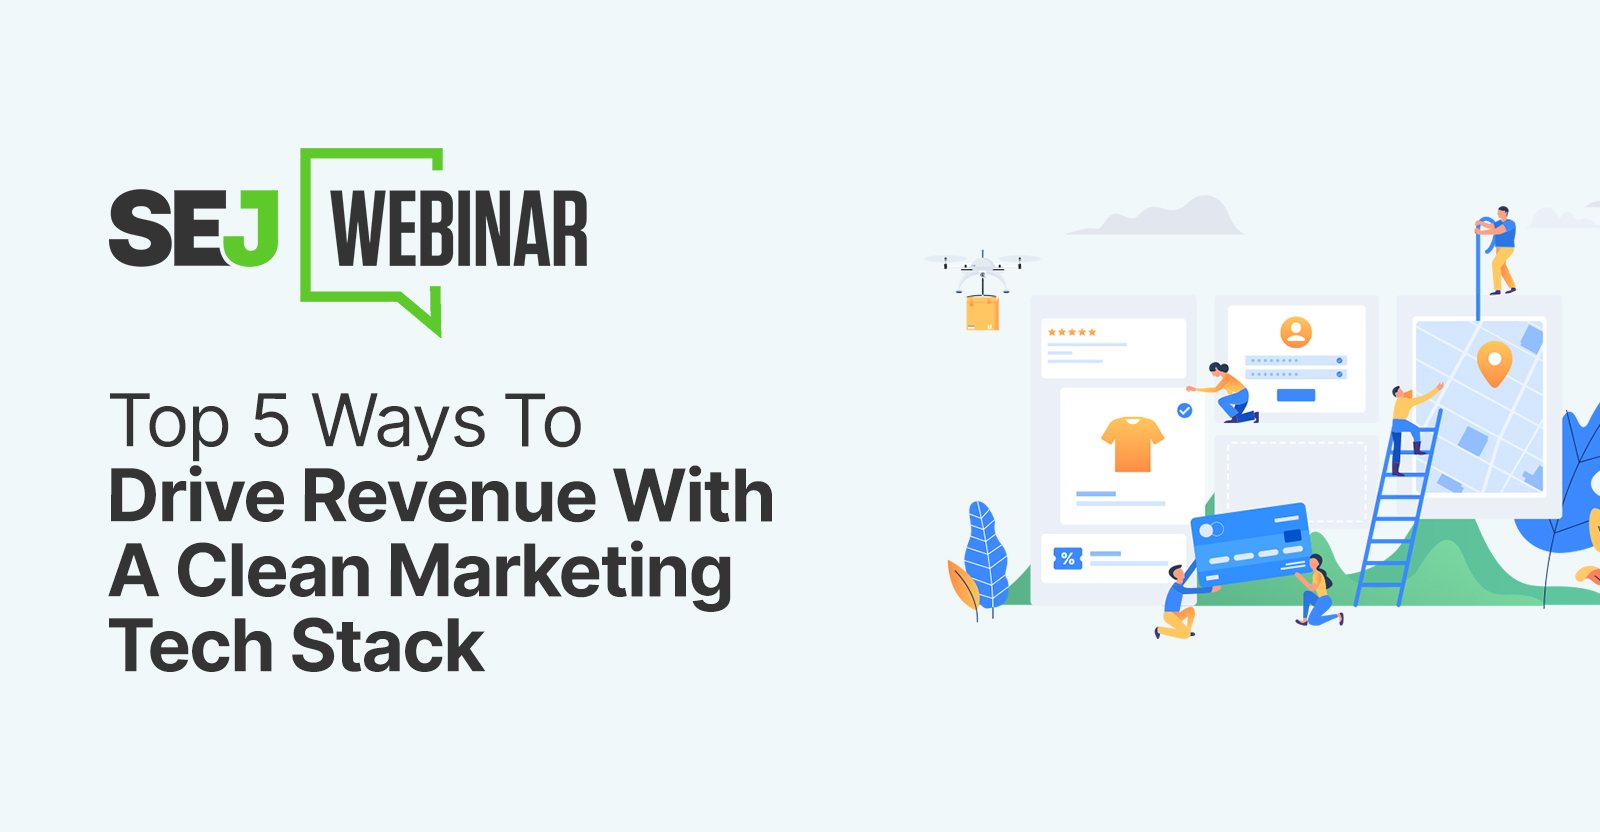 Top 5 Ways To Drive Revenue With Clean Marketing Tech Stack [Webinar]